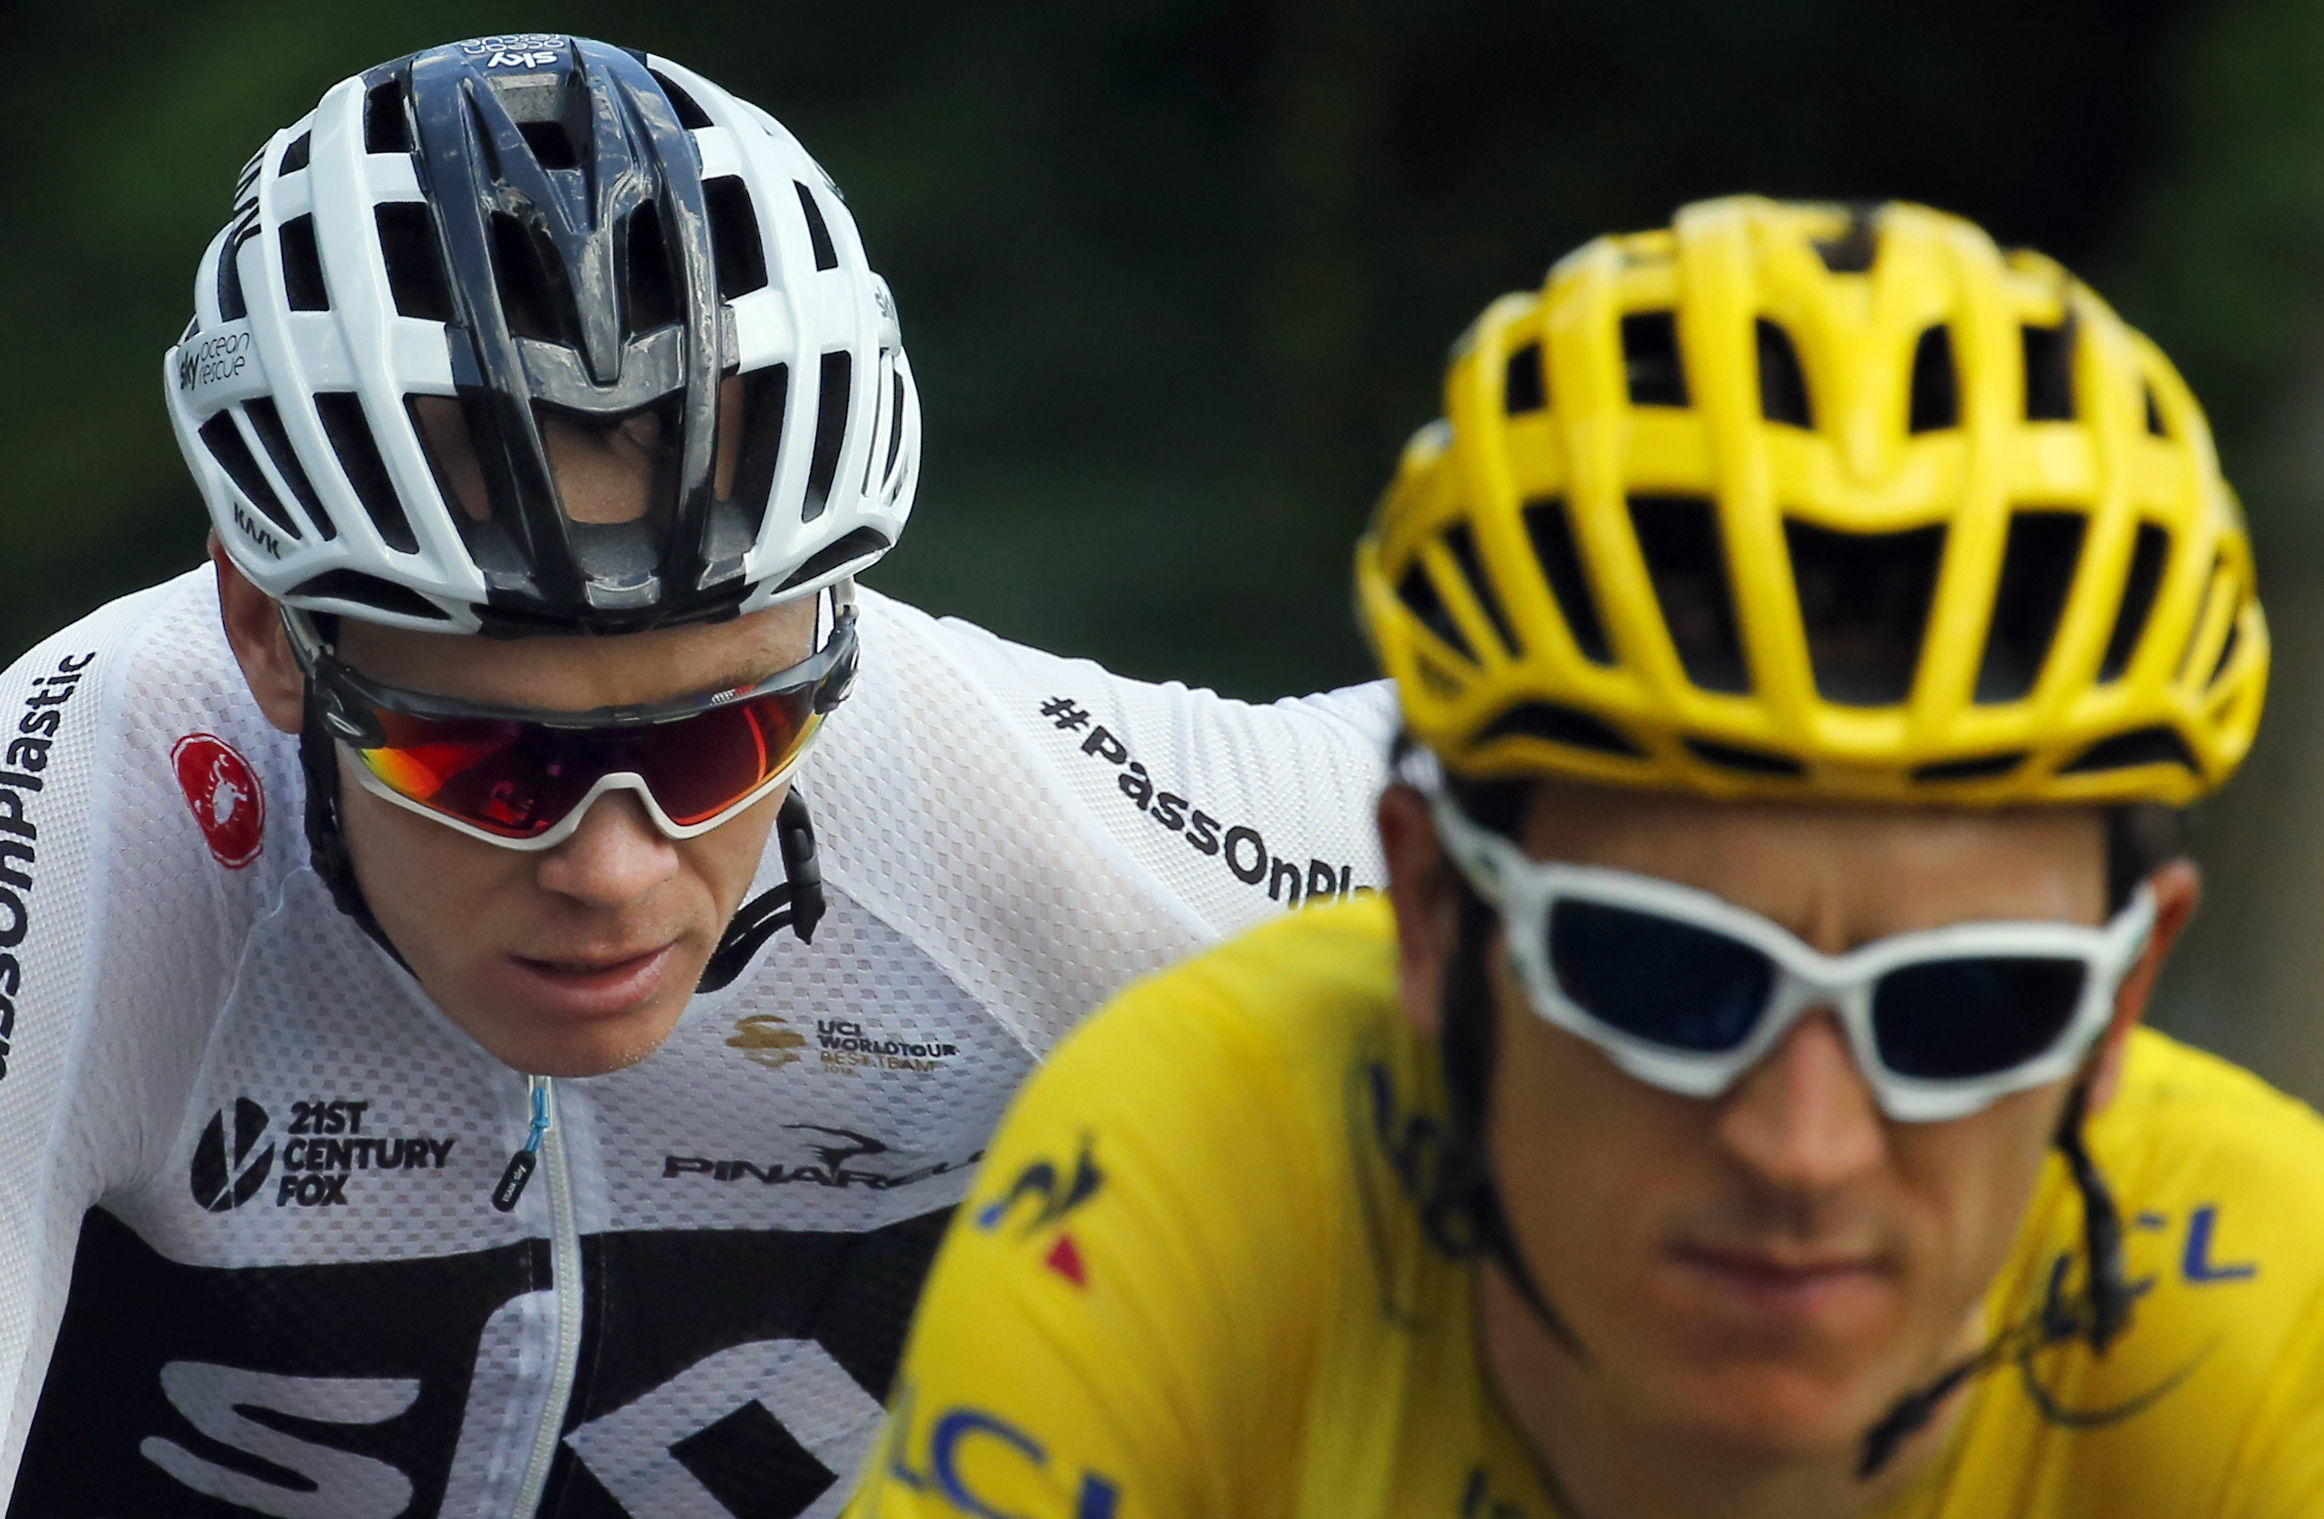 Britain's Geraint Thomas, wearing the overall leader's yellow jersey, and Britain's Chris Froome, ride during the fourteenth stage of the Tour de France cycling race over 188 kilometers (116.8 miles) with start in Saint-Paul Trois-Chateaux and Mende, France, Saturday, July 21, 2018. (AP Photo/Peter Dejong)